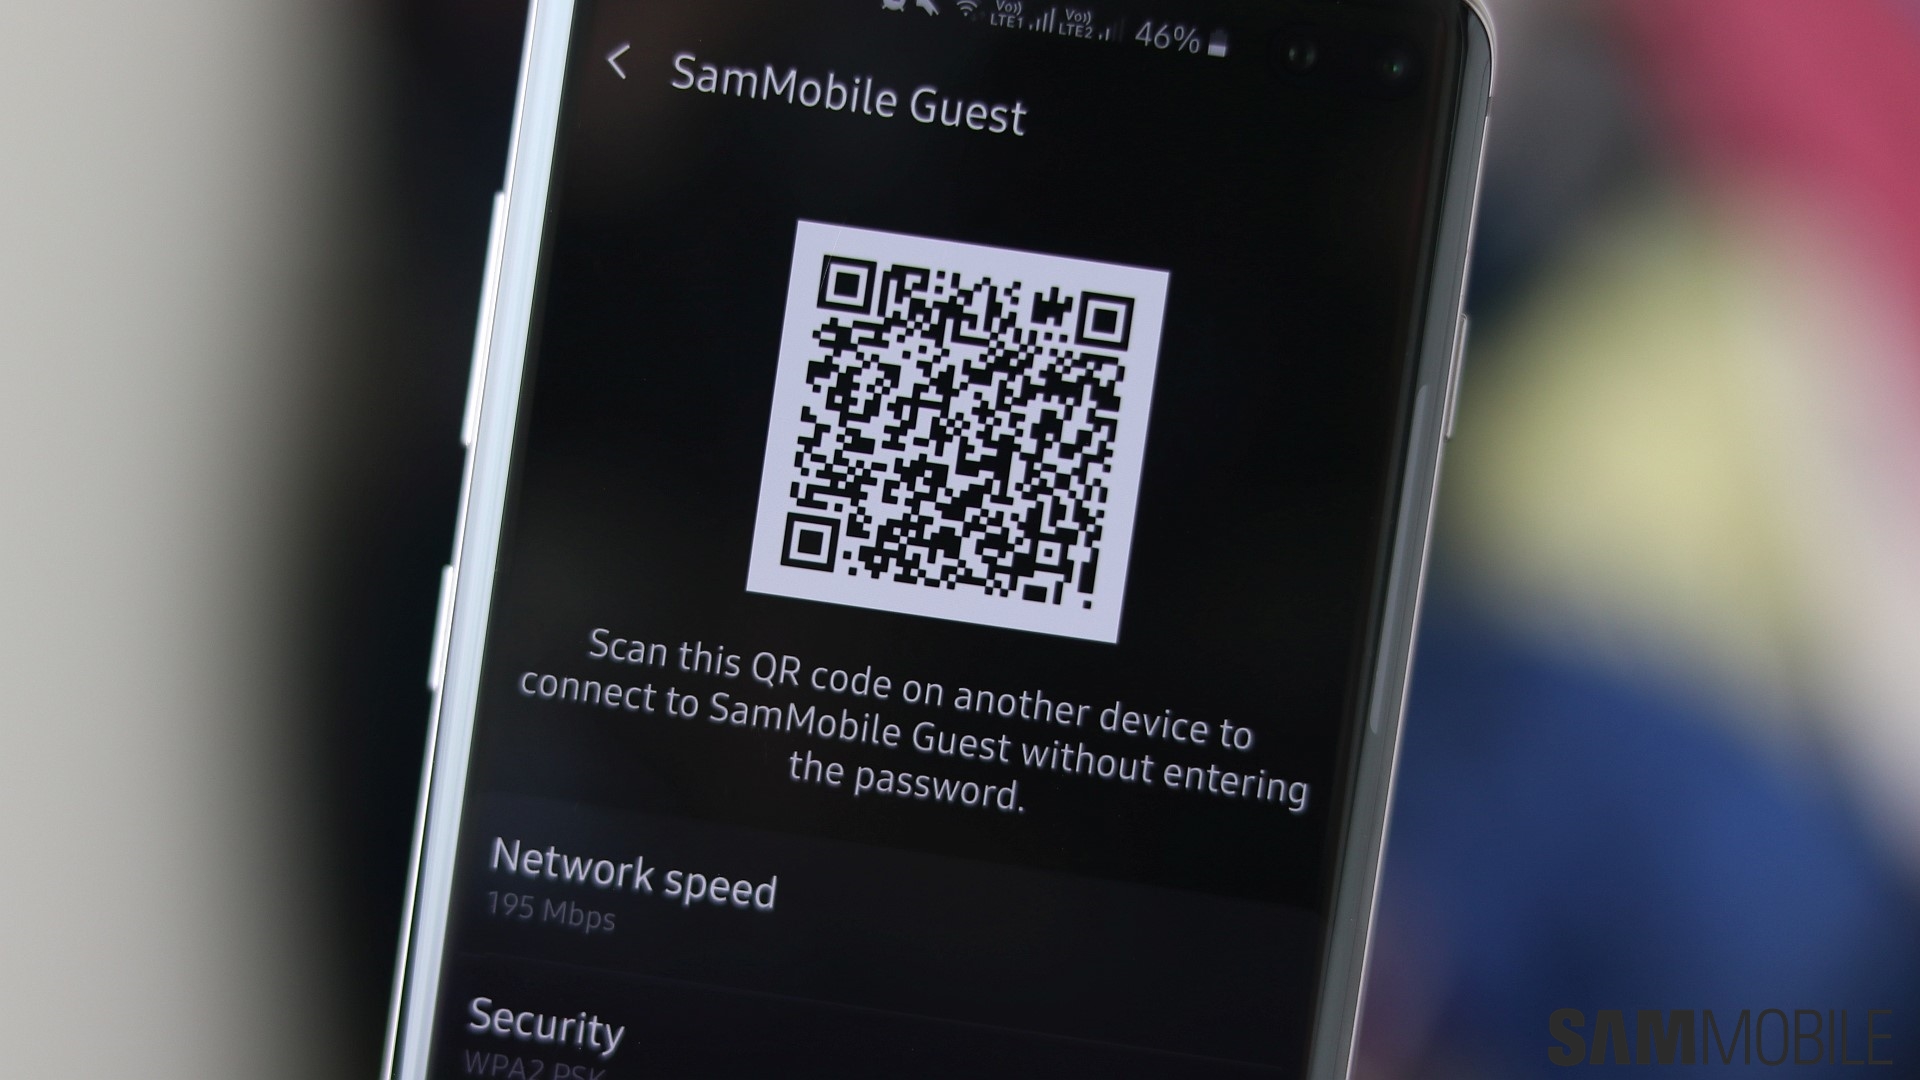 Avoid malware, use your Galaxy phone's camera to scan QR codes! - SamMobile